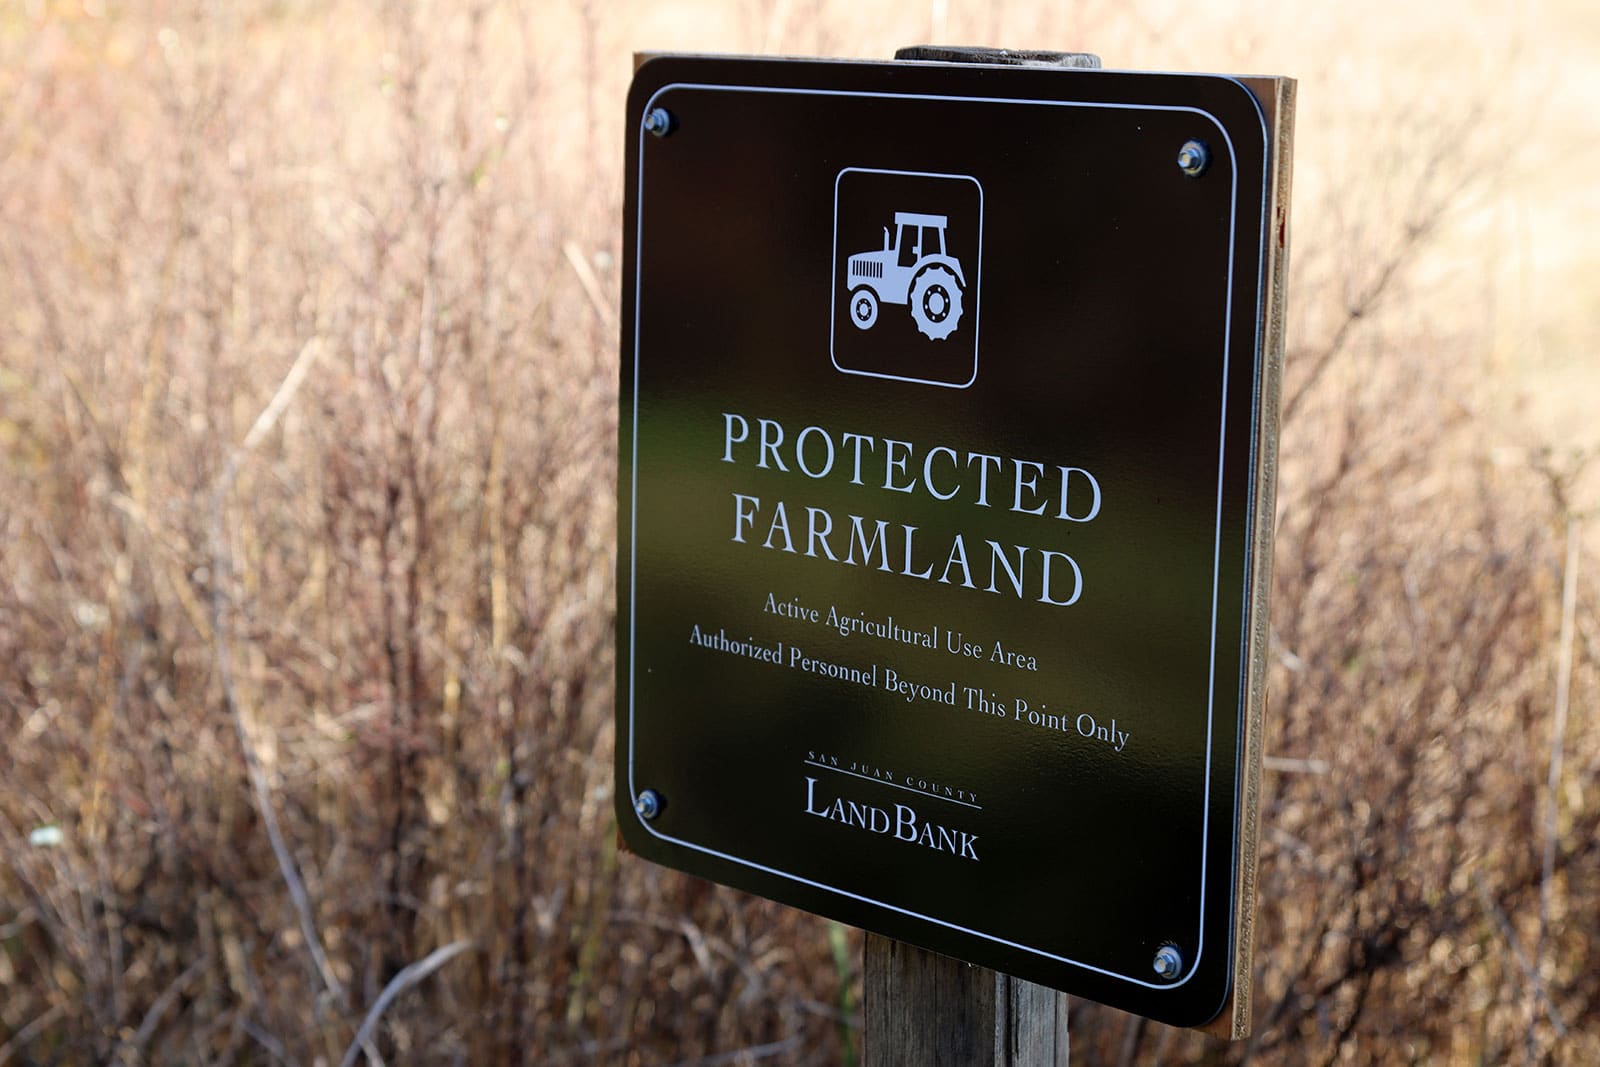 Protected Farmland sign in an unmowed field